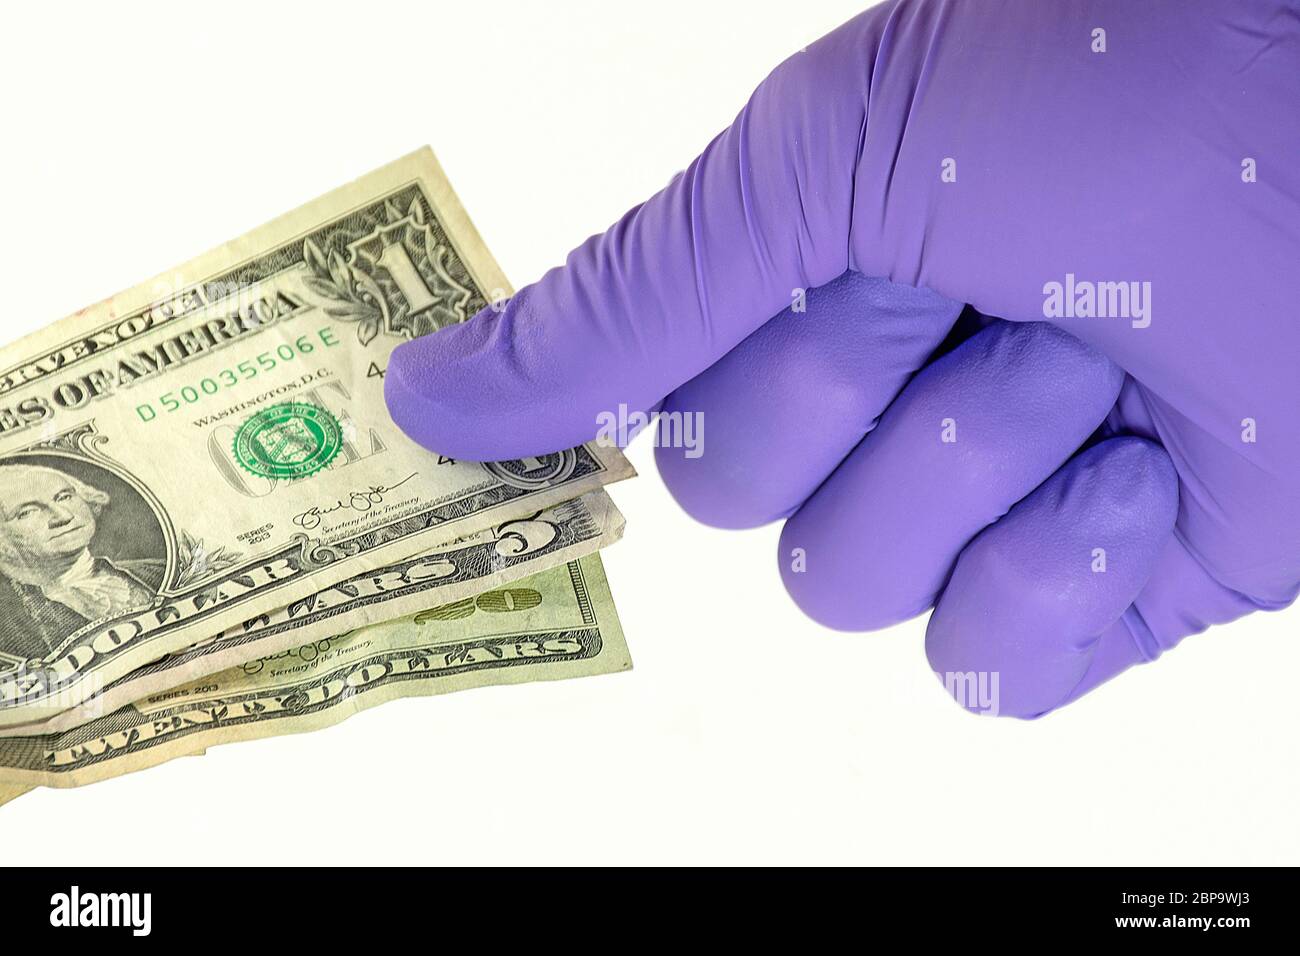 purple latex glove protecting hand from germs on dollar bills Stock Photo